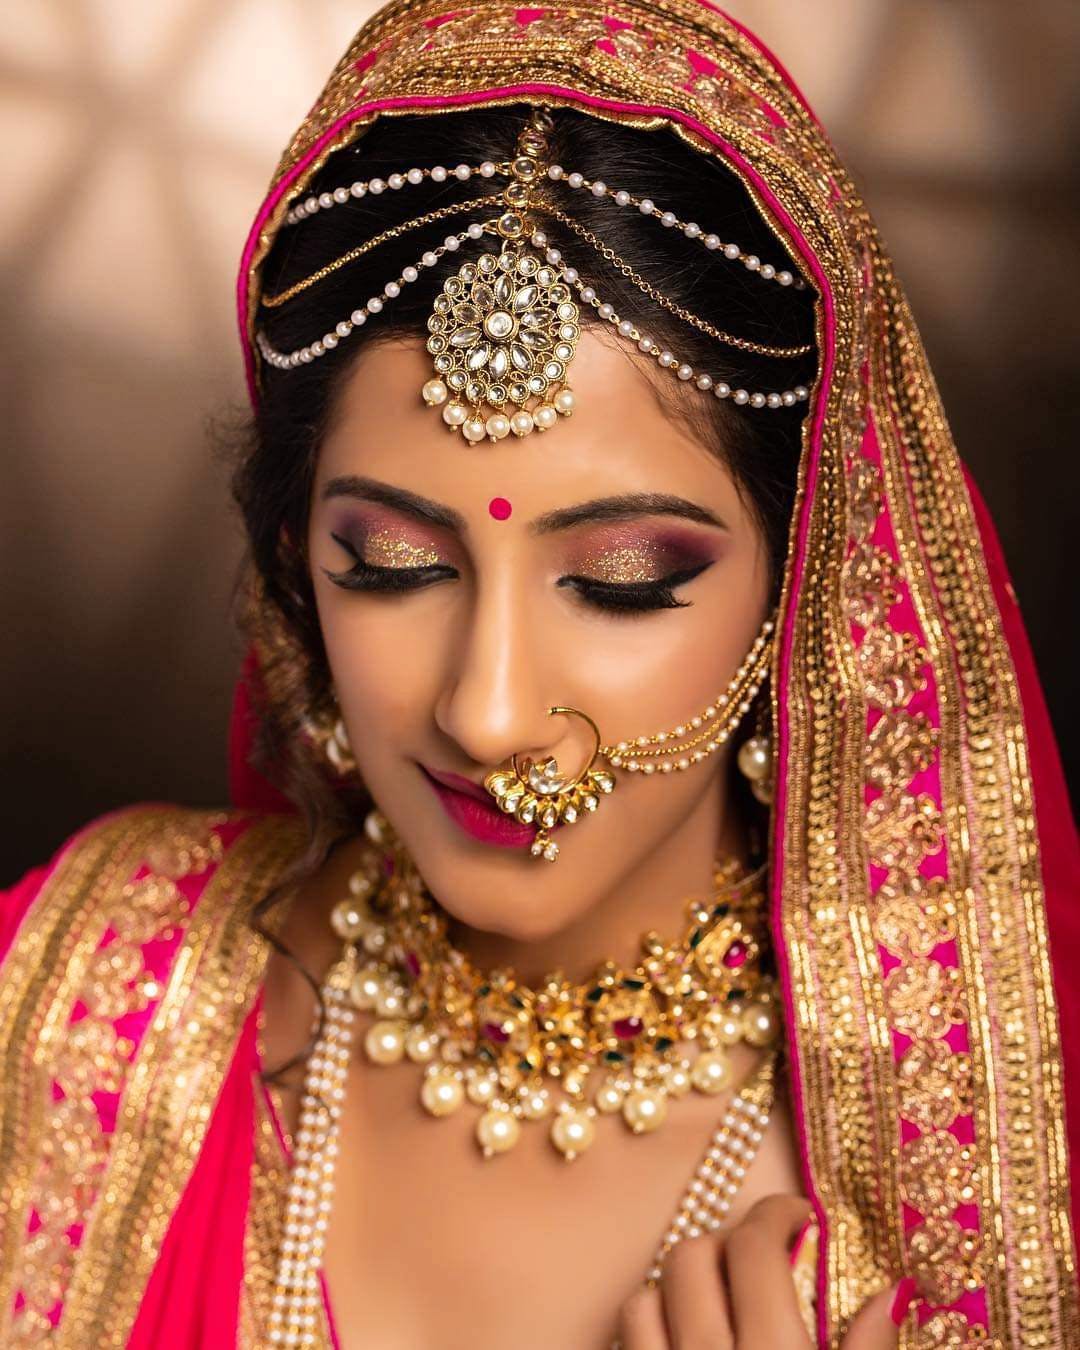 From Bridal Makeup To Hairstyling, This Makeup Artist Does It All | LBB